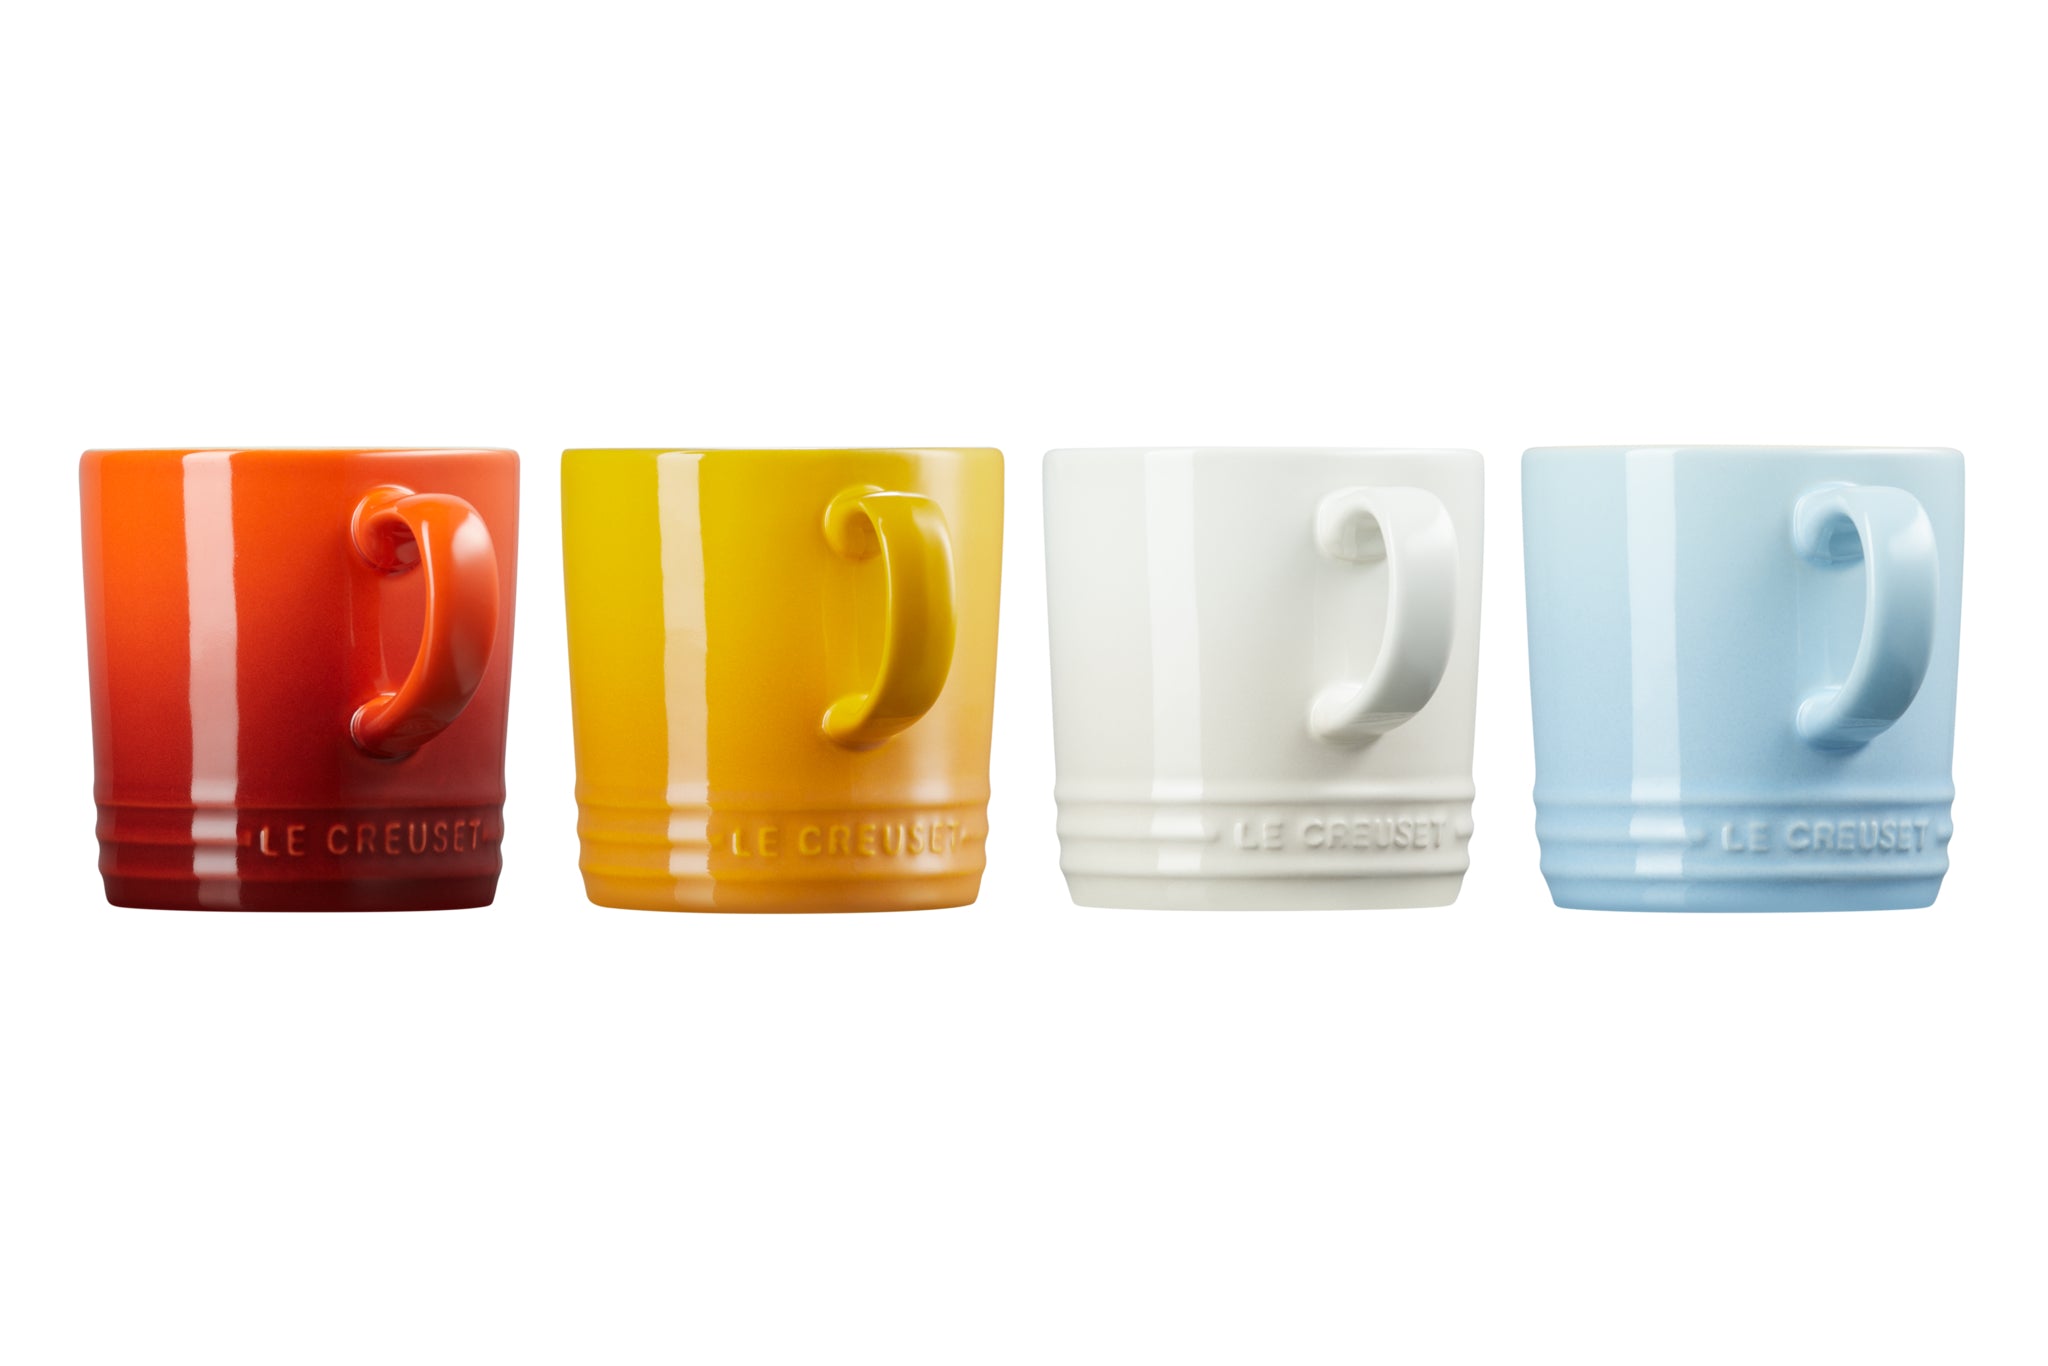 Le Creuset Cappuccino Cups and Saucers, Set of 4